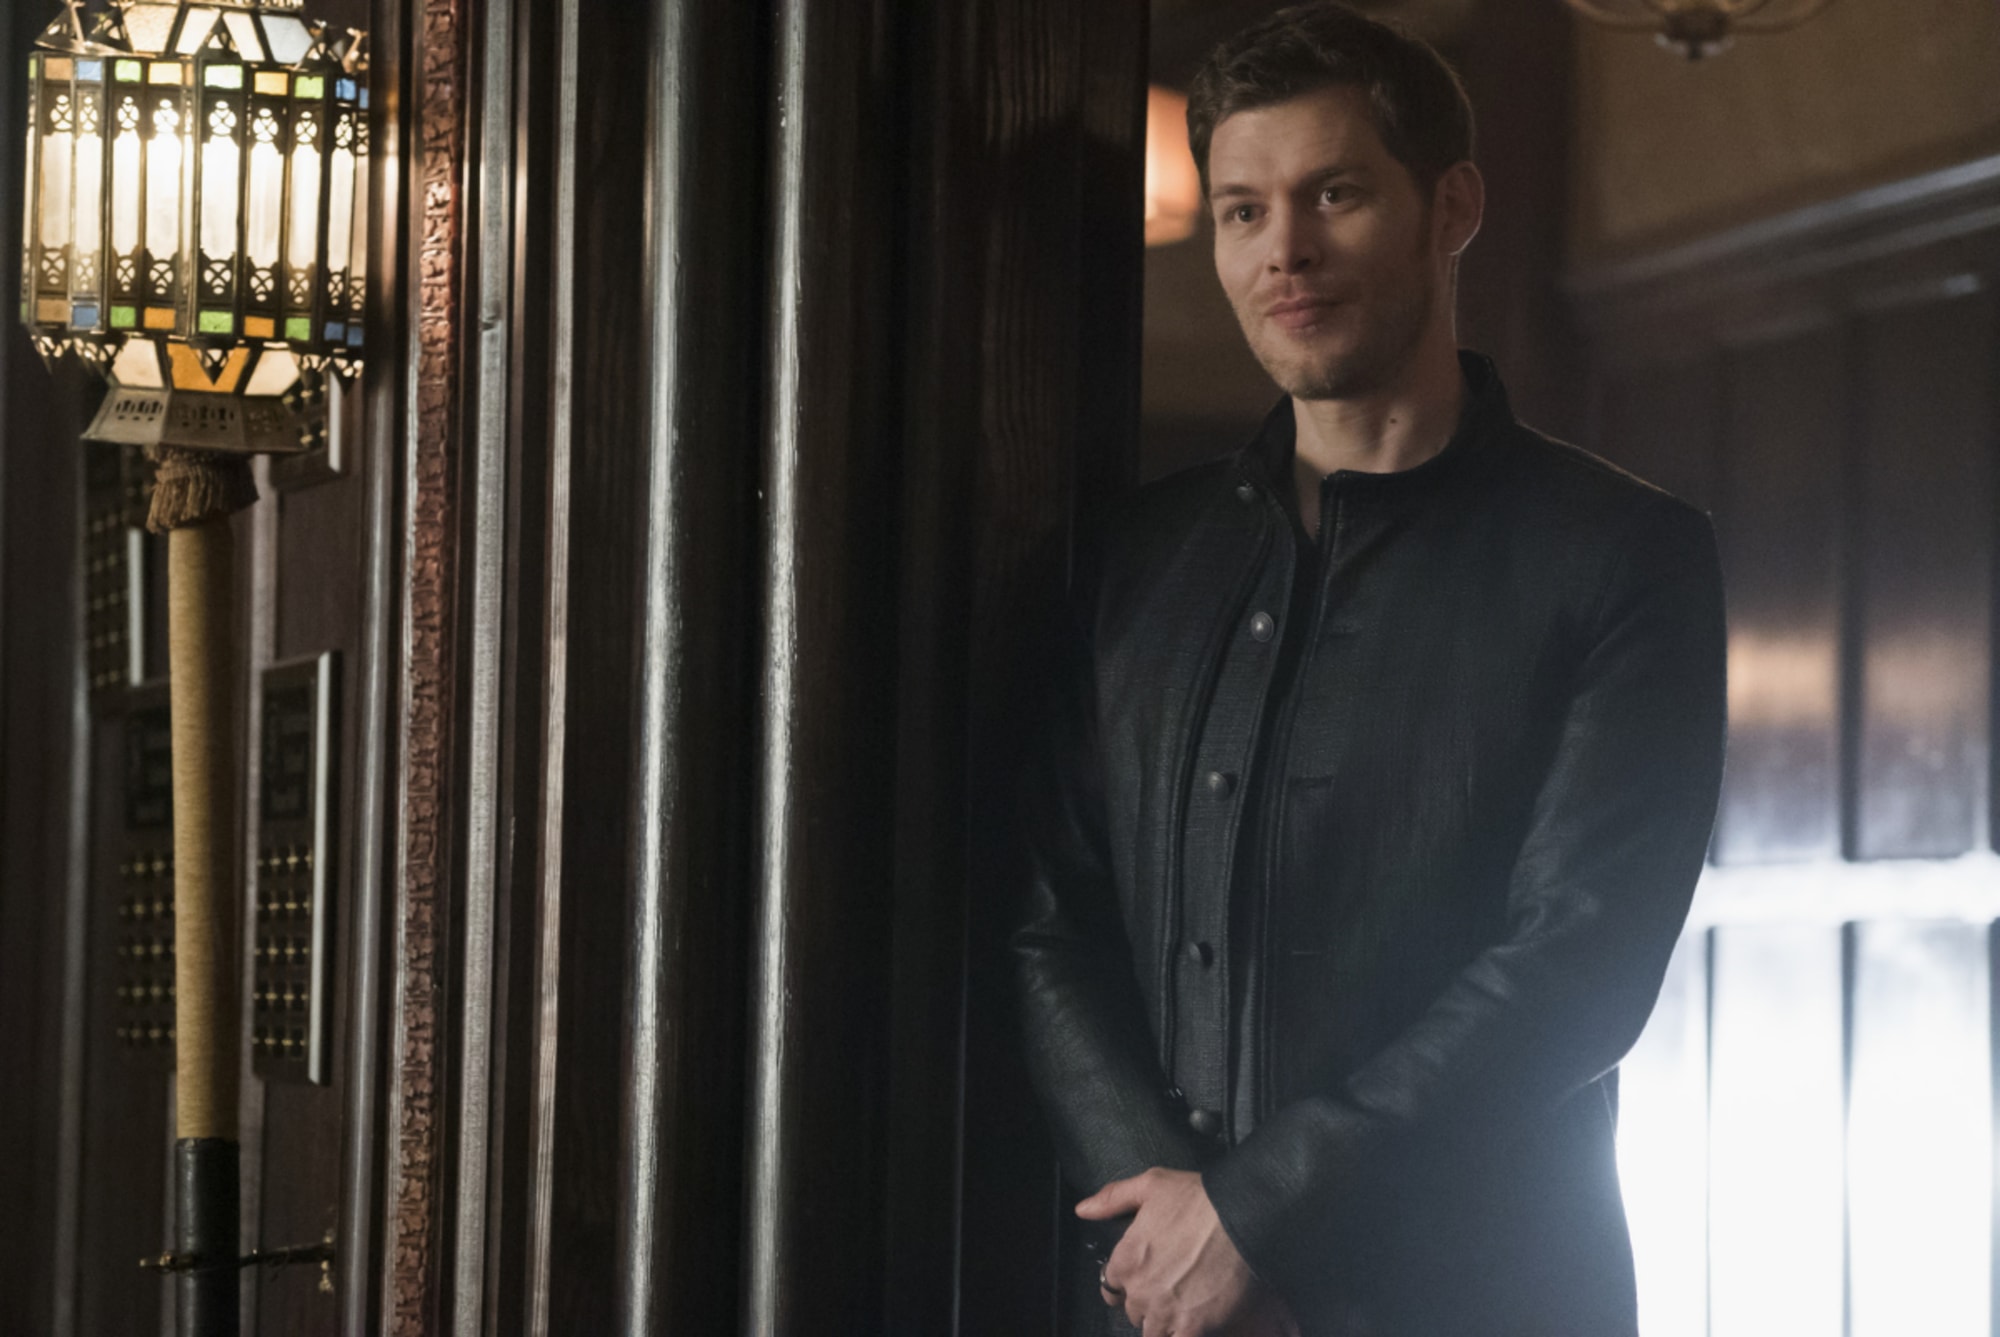 The Originals: Kol Mikaelson will return to present-day this season